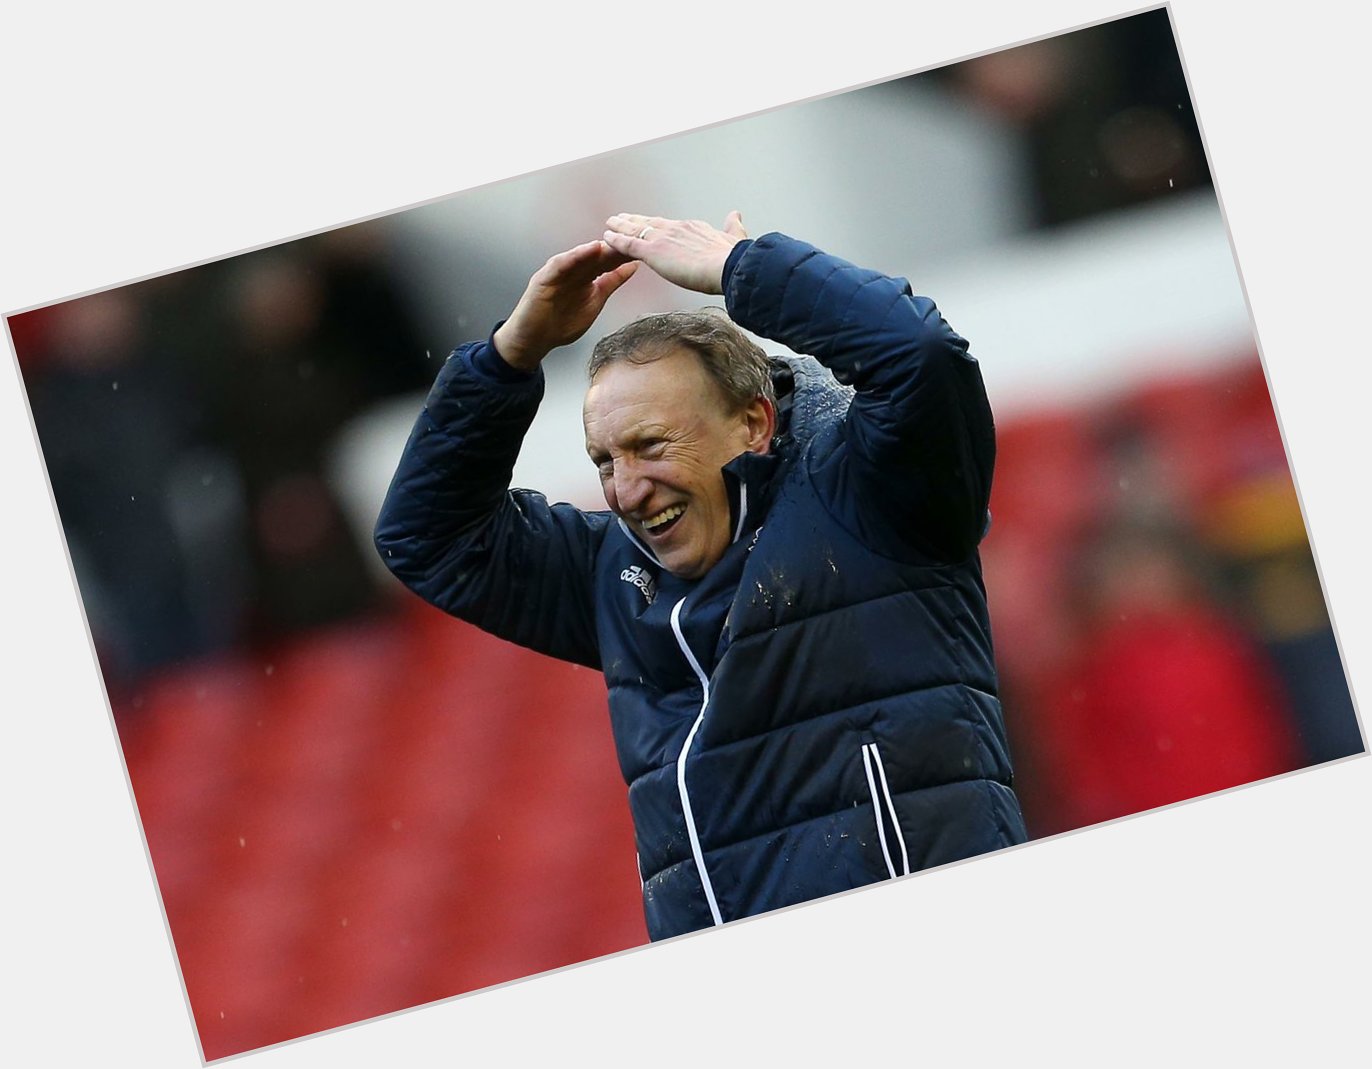 The first of December can only mean one thing... Neil warnock turns 69 today! Happy birthday gaffer 